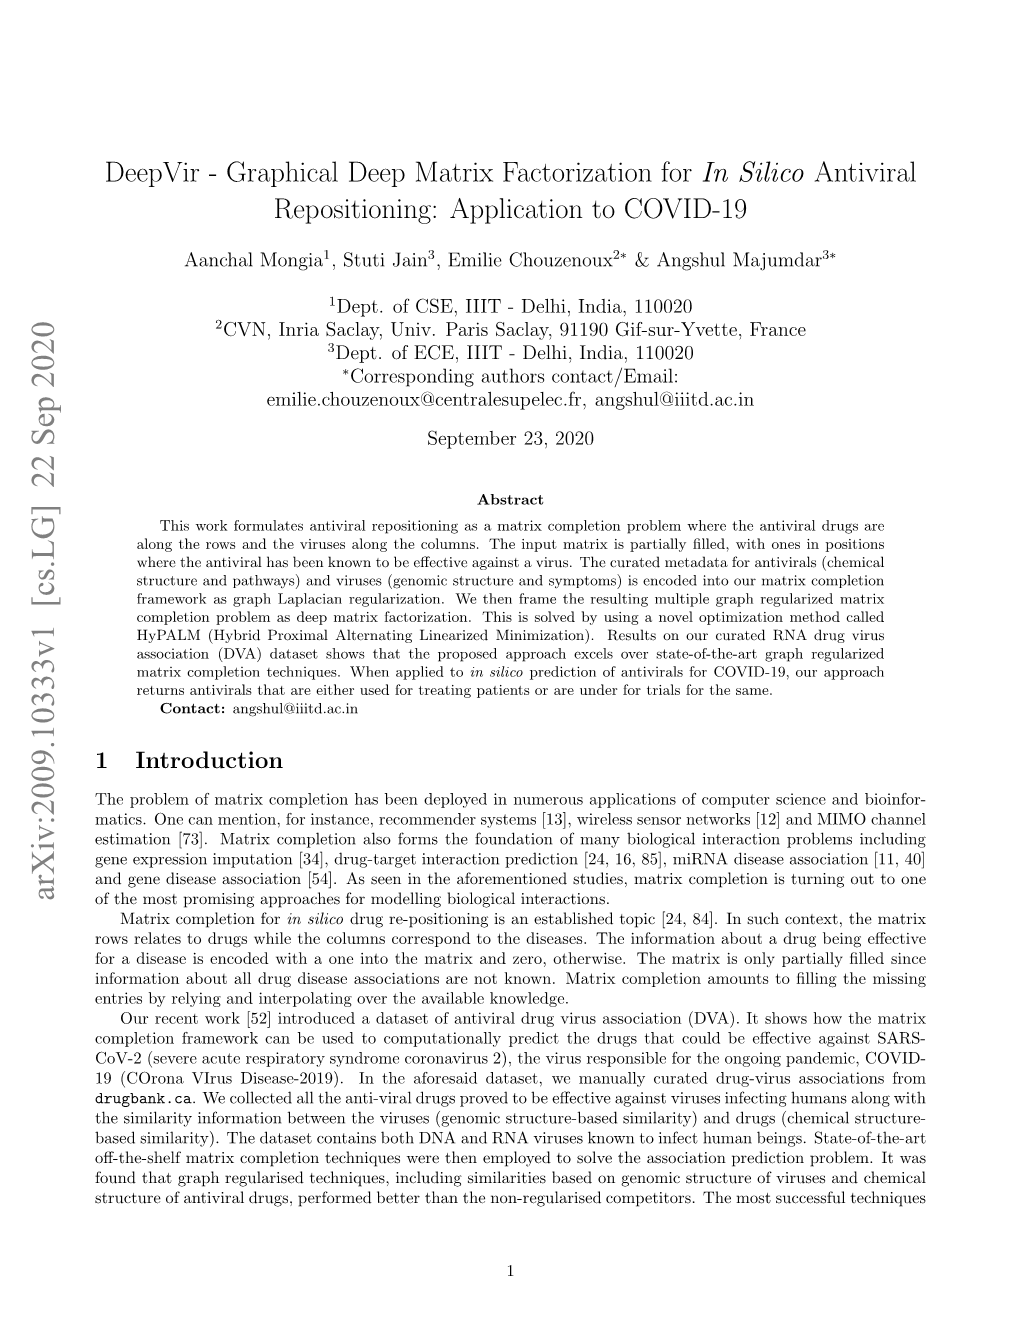 Graphical Deep Matrix Factorization for in Silico Antiviral Repositioning: Application to COVID-19